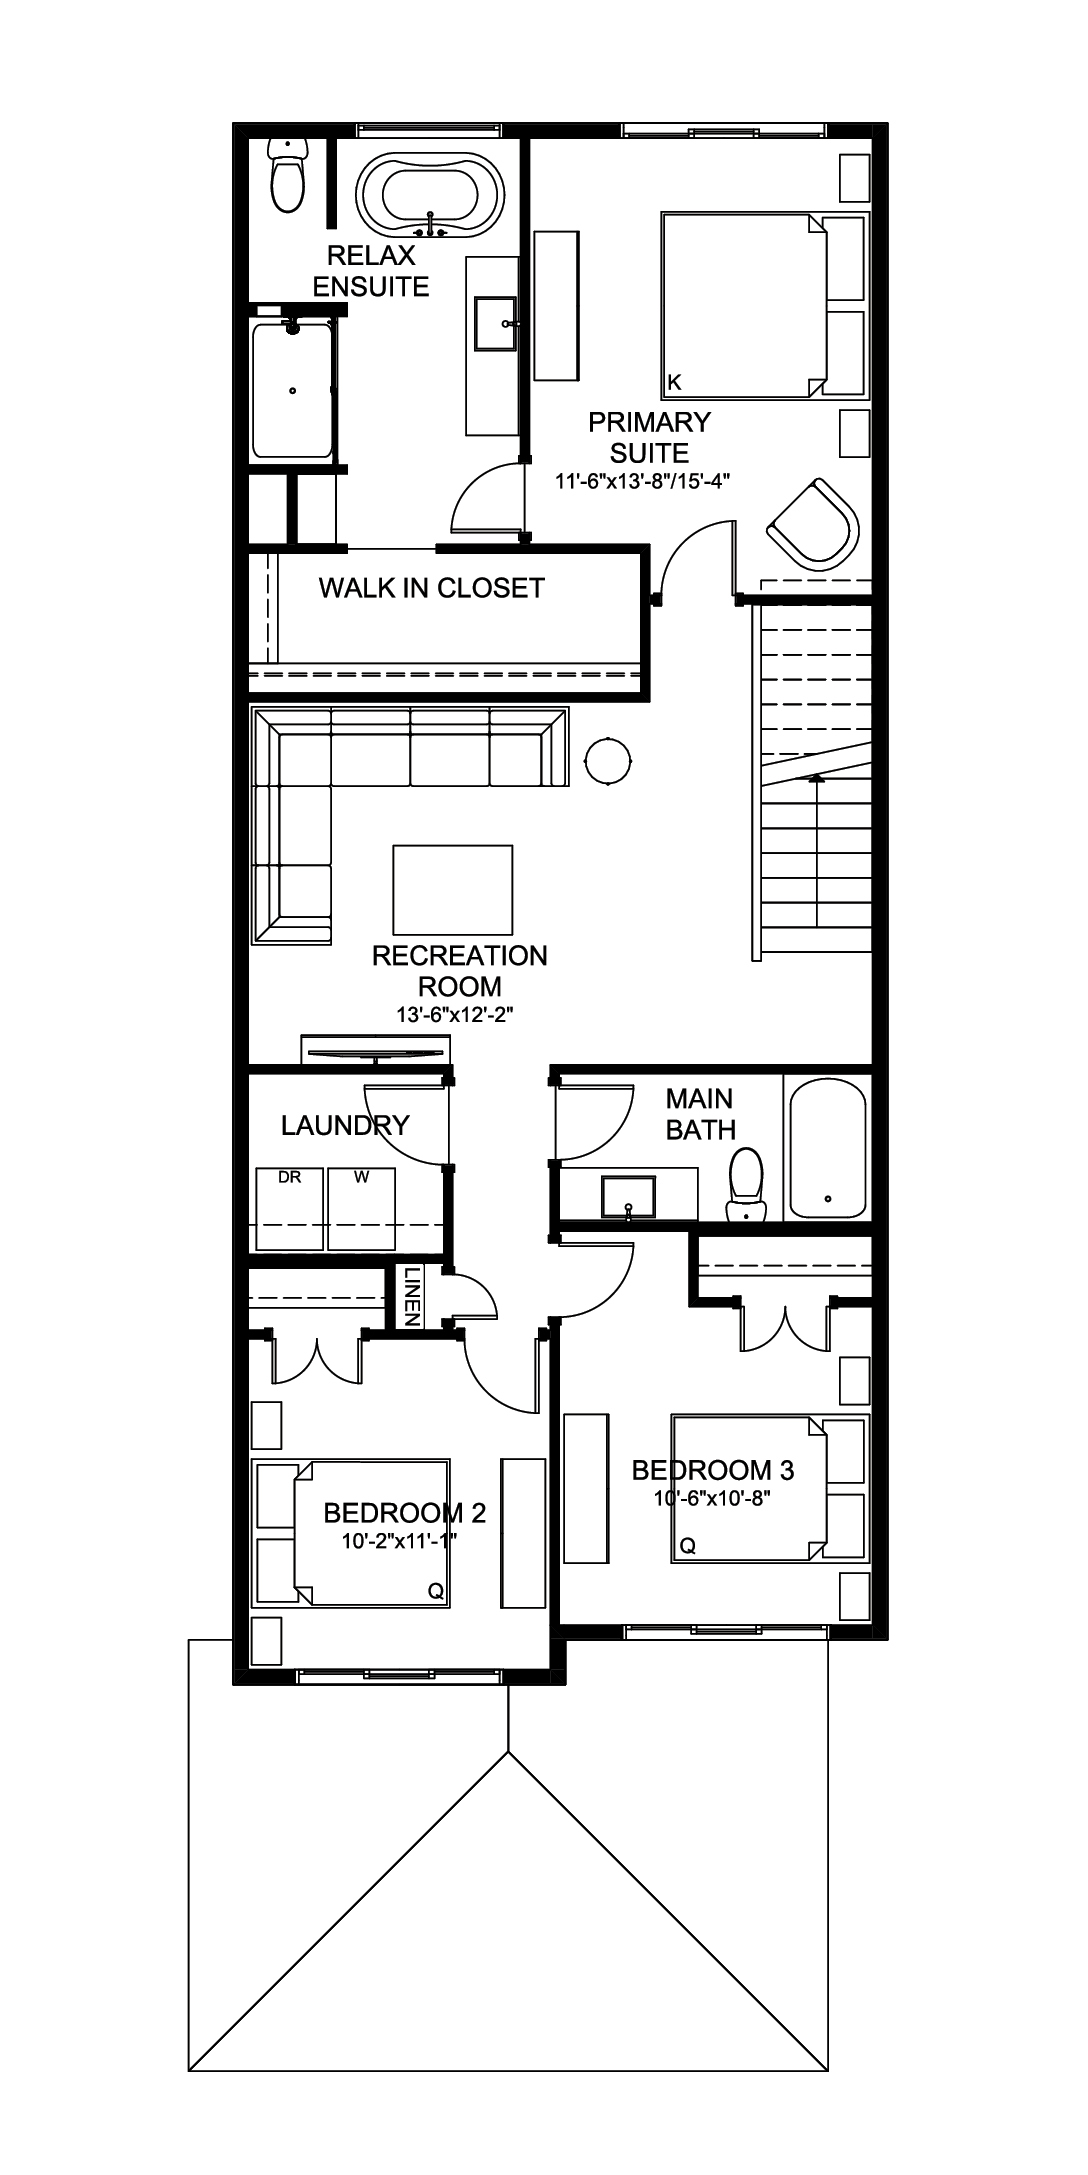  Entertain Impression 22  Floor Plan of Woodhaven Edgemont with undefined beds